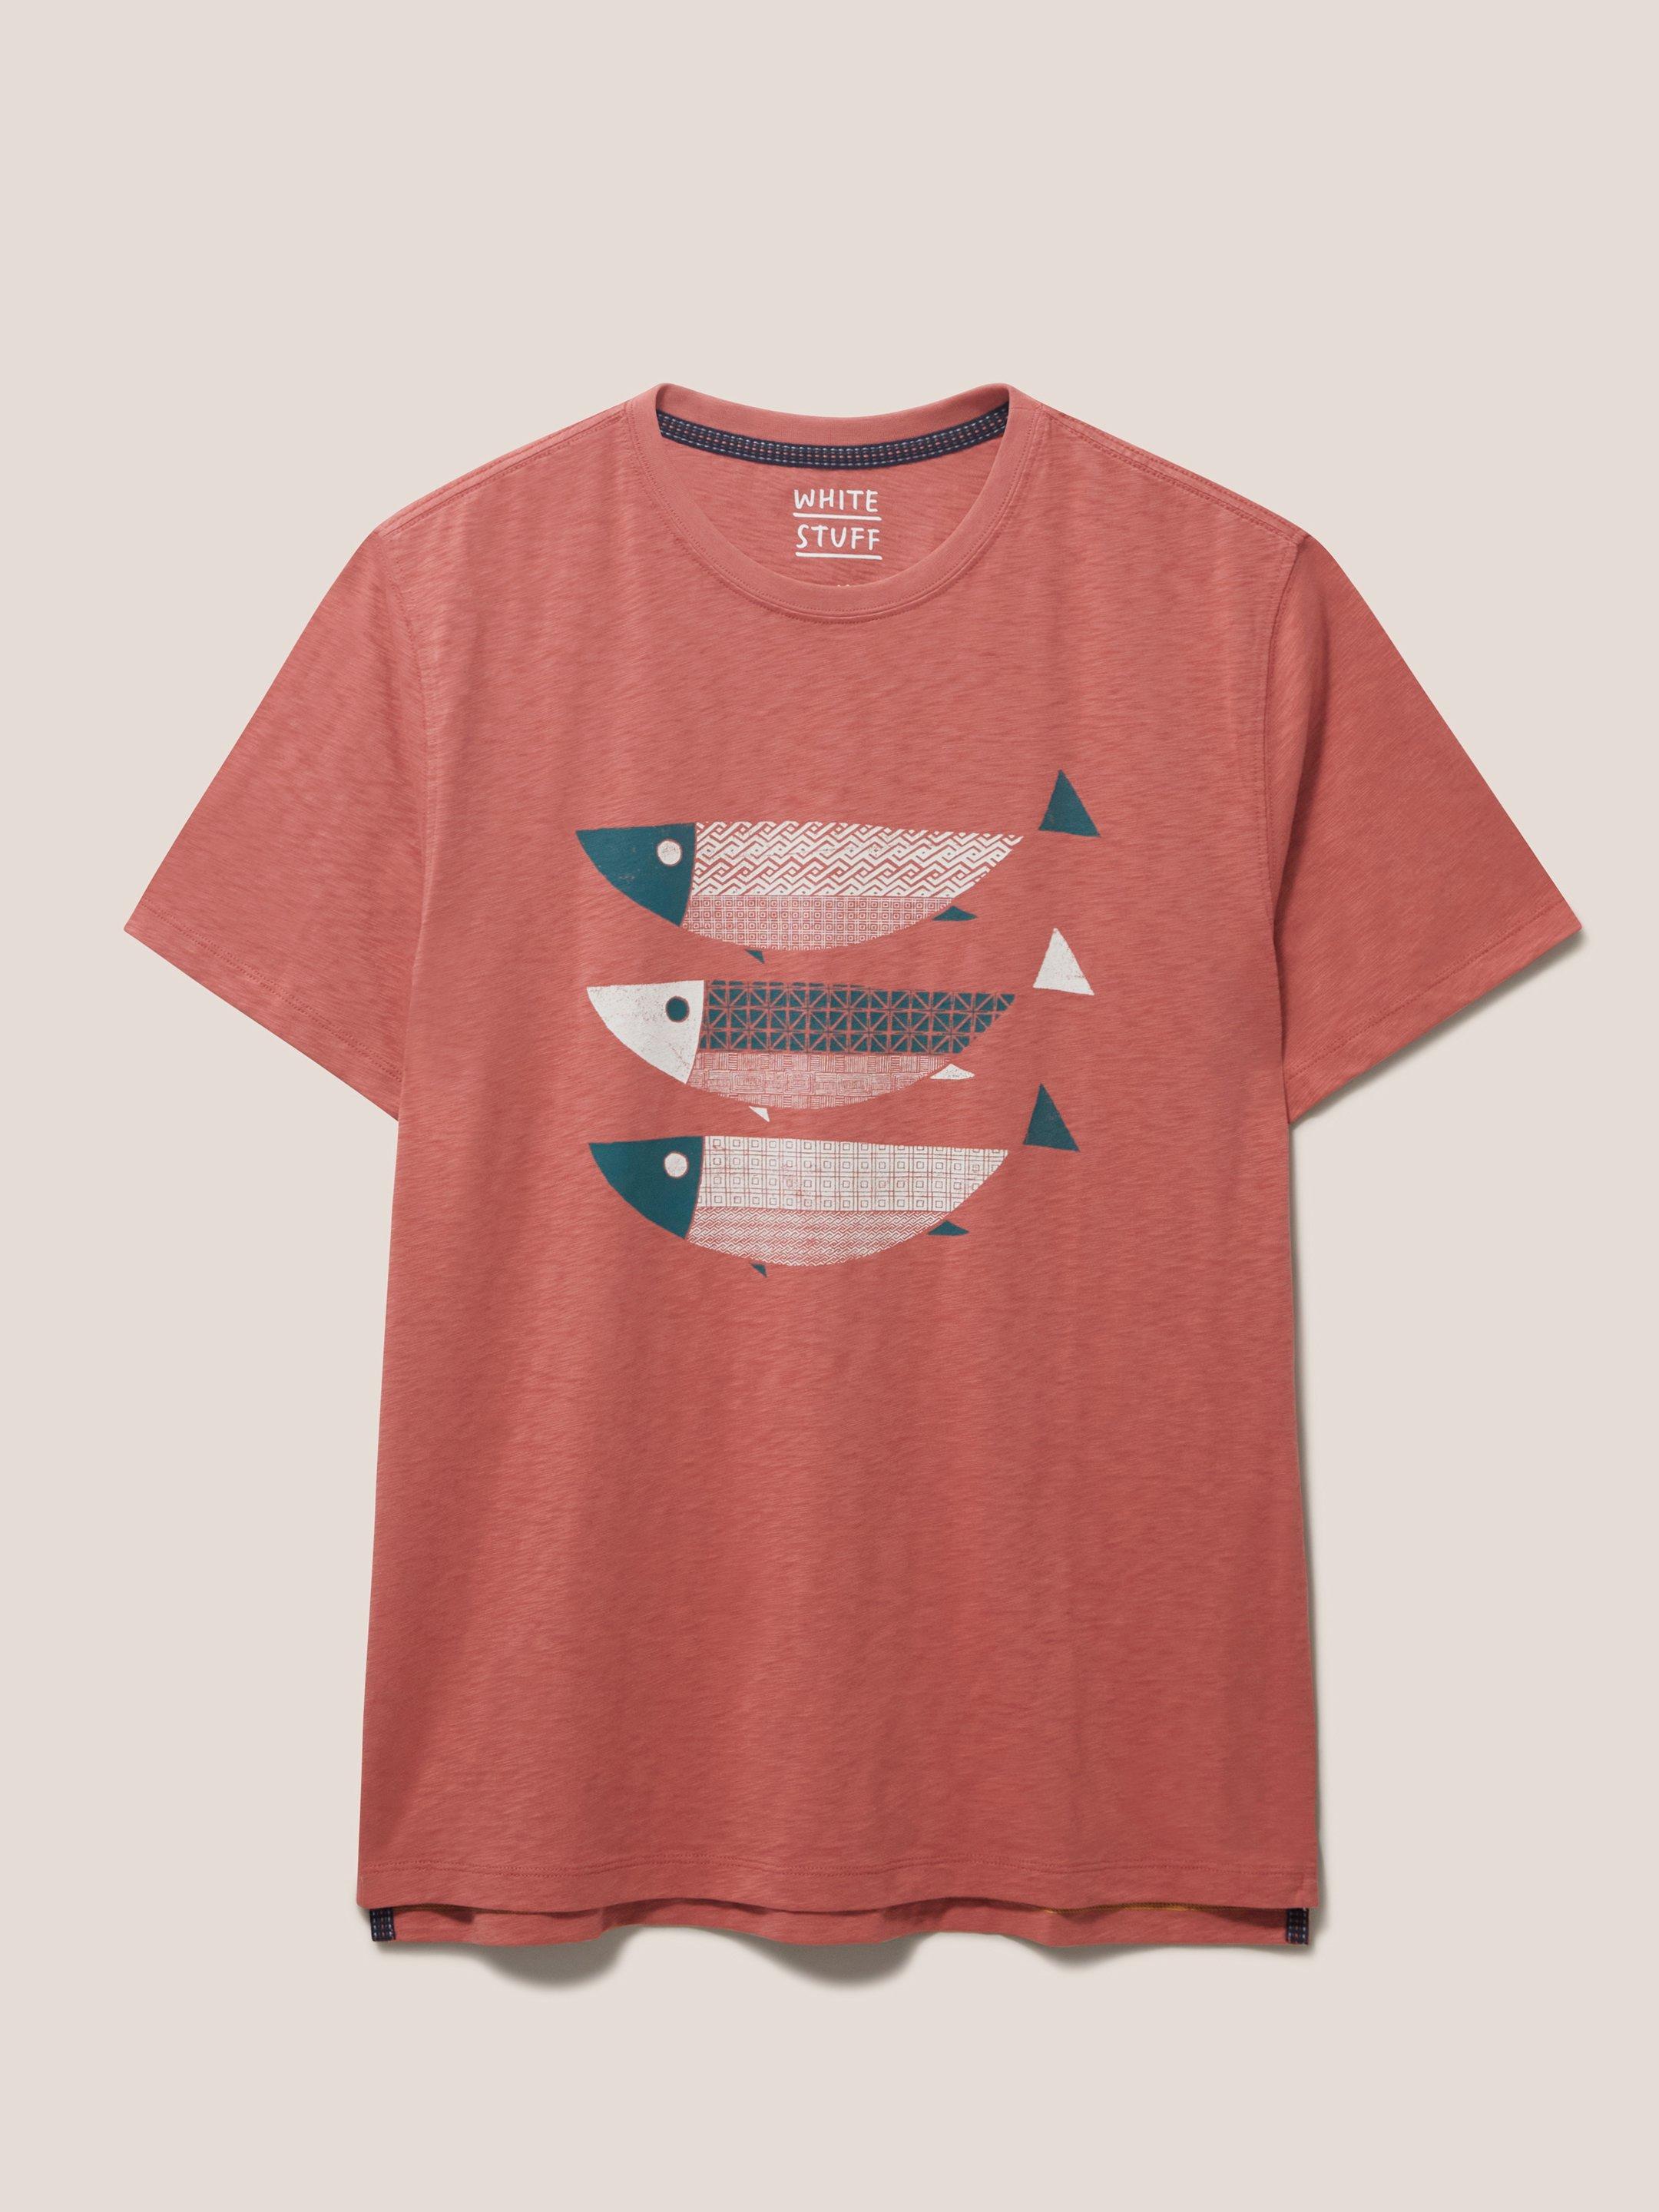 Fish Graphic Tee in DK PINK - FLAT FRONT